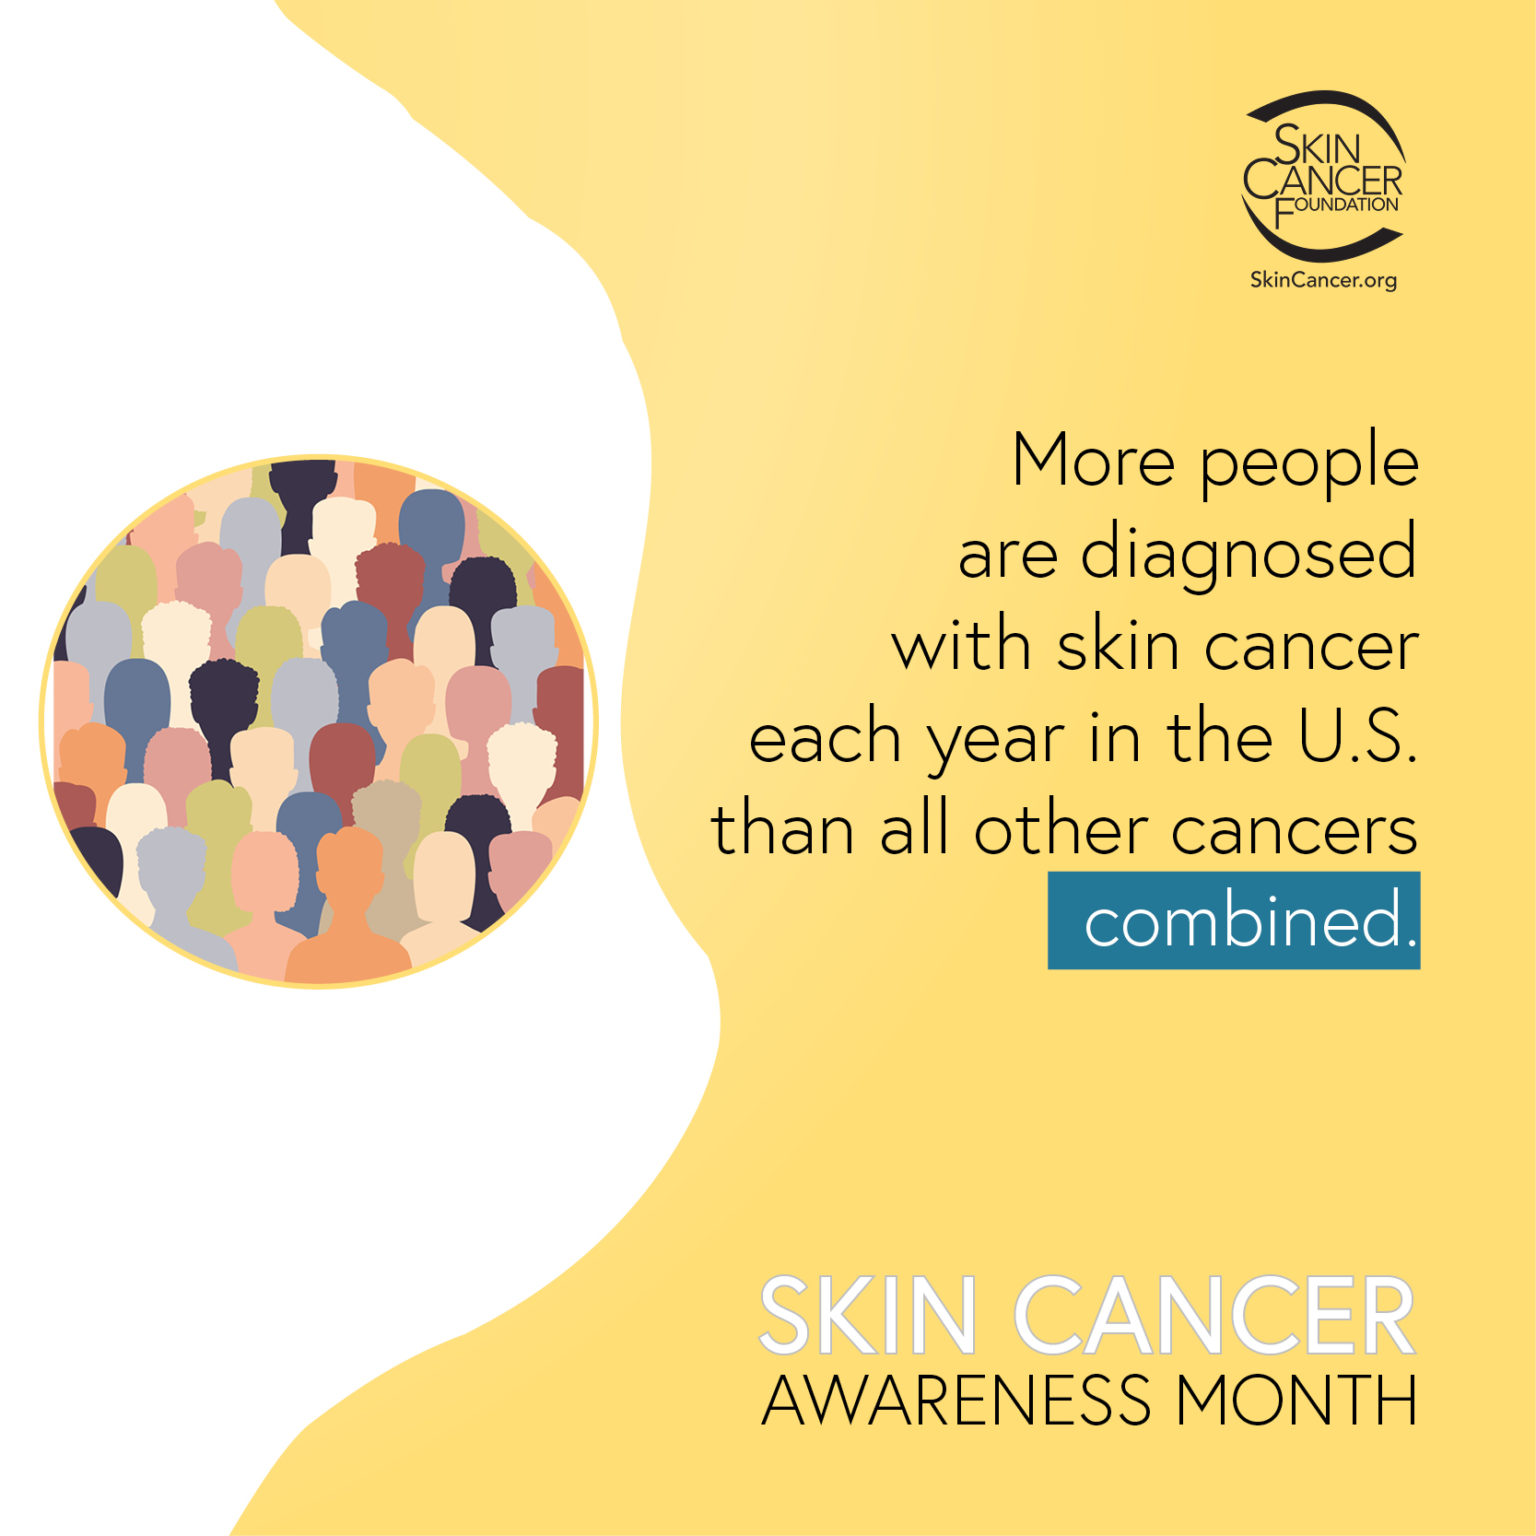 Skin Cancer Awareness Month Toolkit The Skin Cancer Foundation